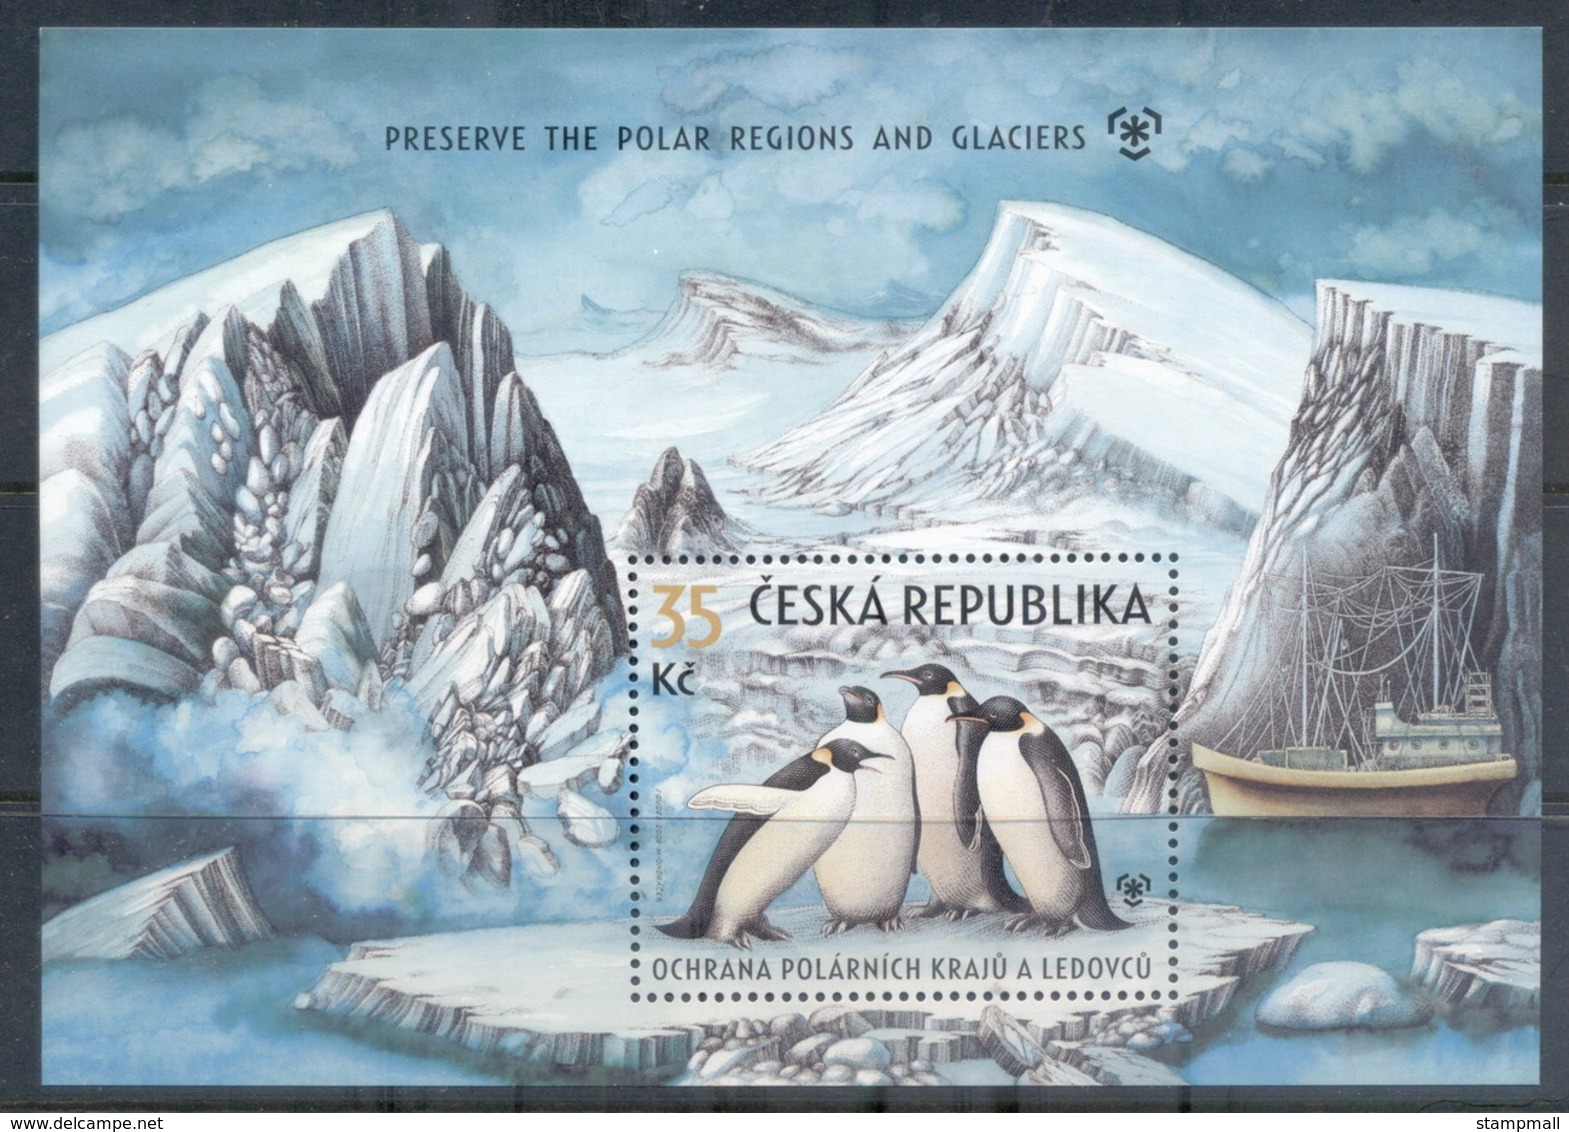 Czech Republic 2009 Preserve The Polar Regions And Glaciers MS MUH - Unused Stamps